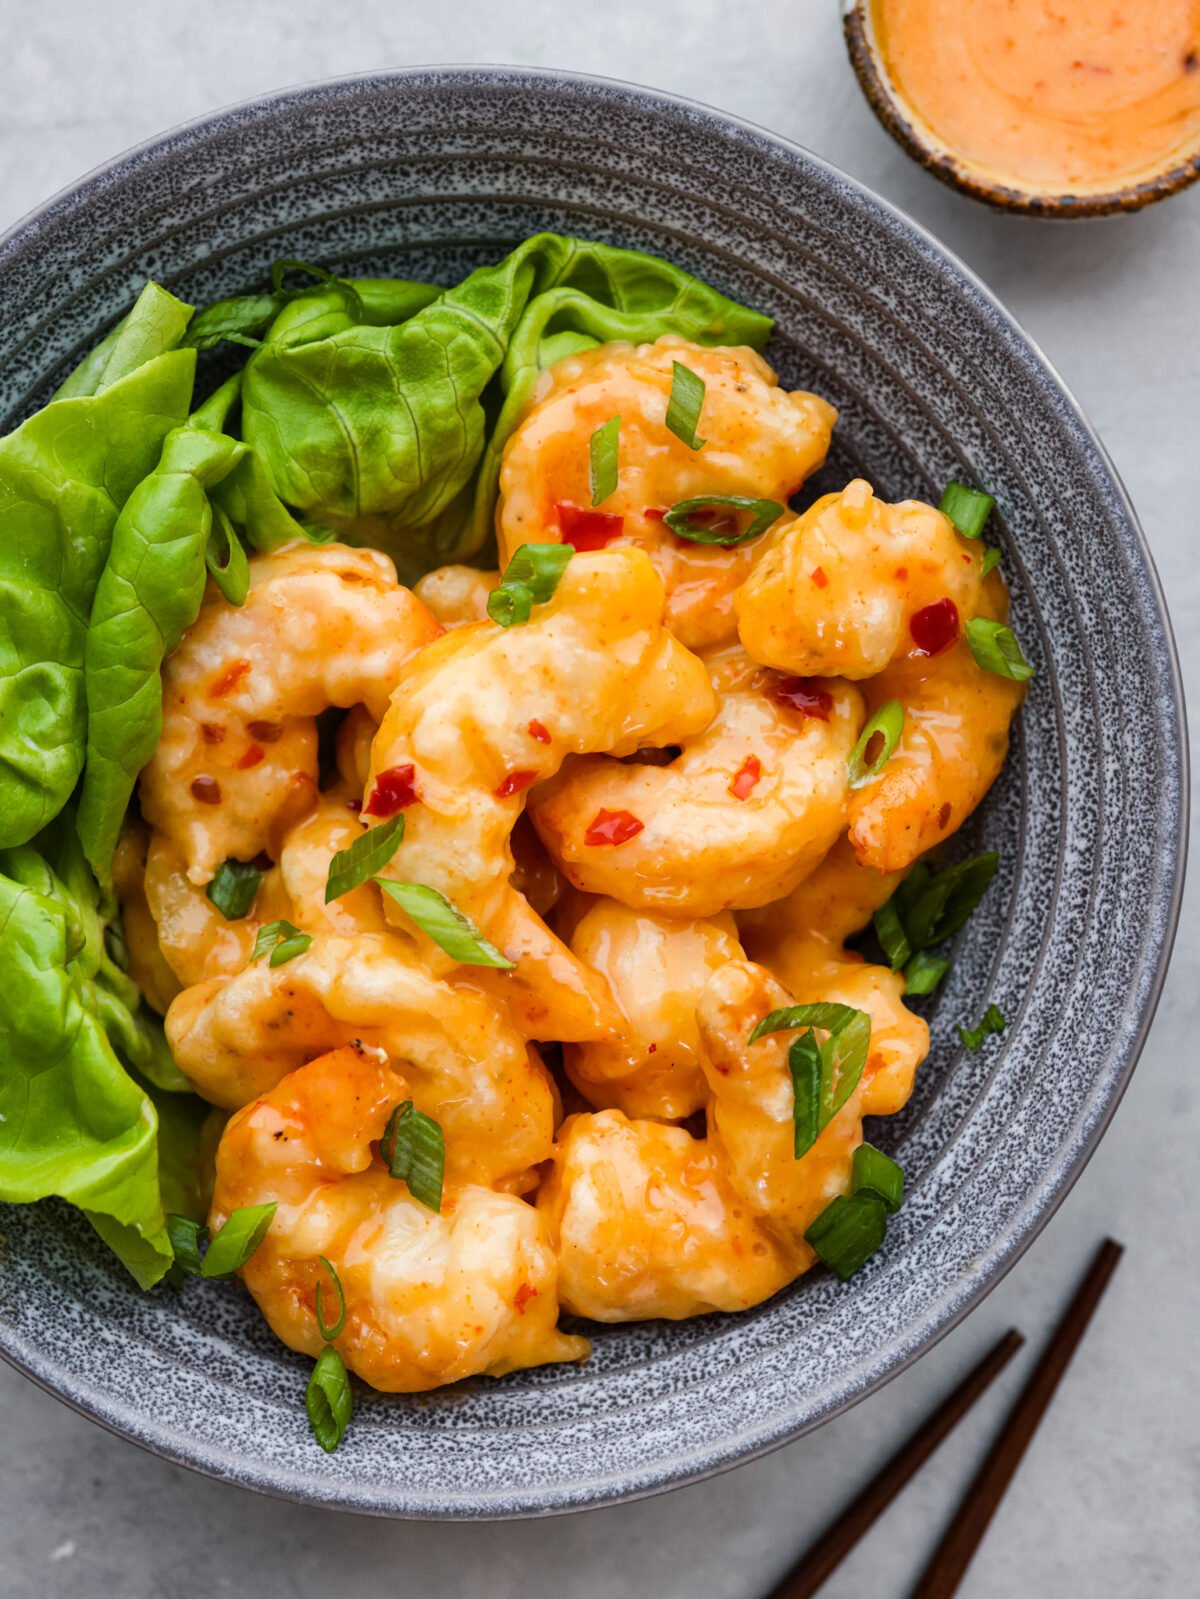 Top-down view of dynamite shrimp served in a stoneware bowl with greens.